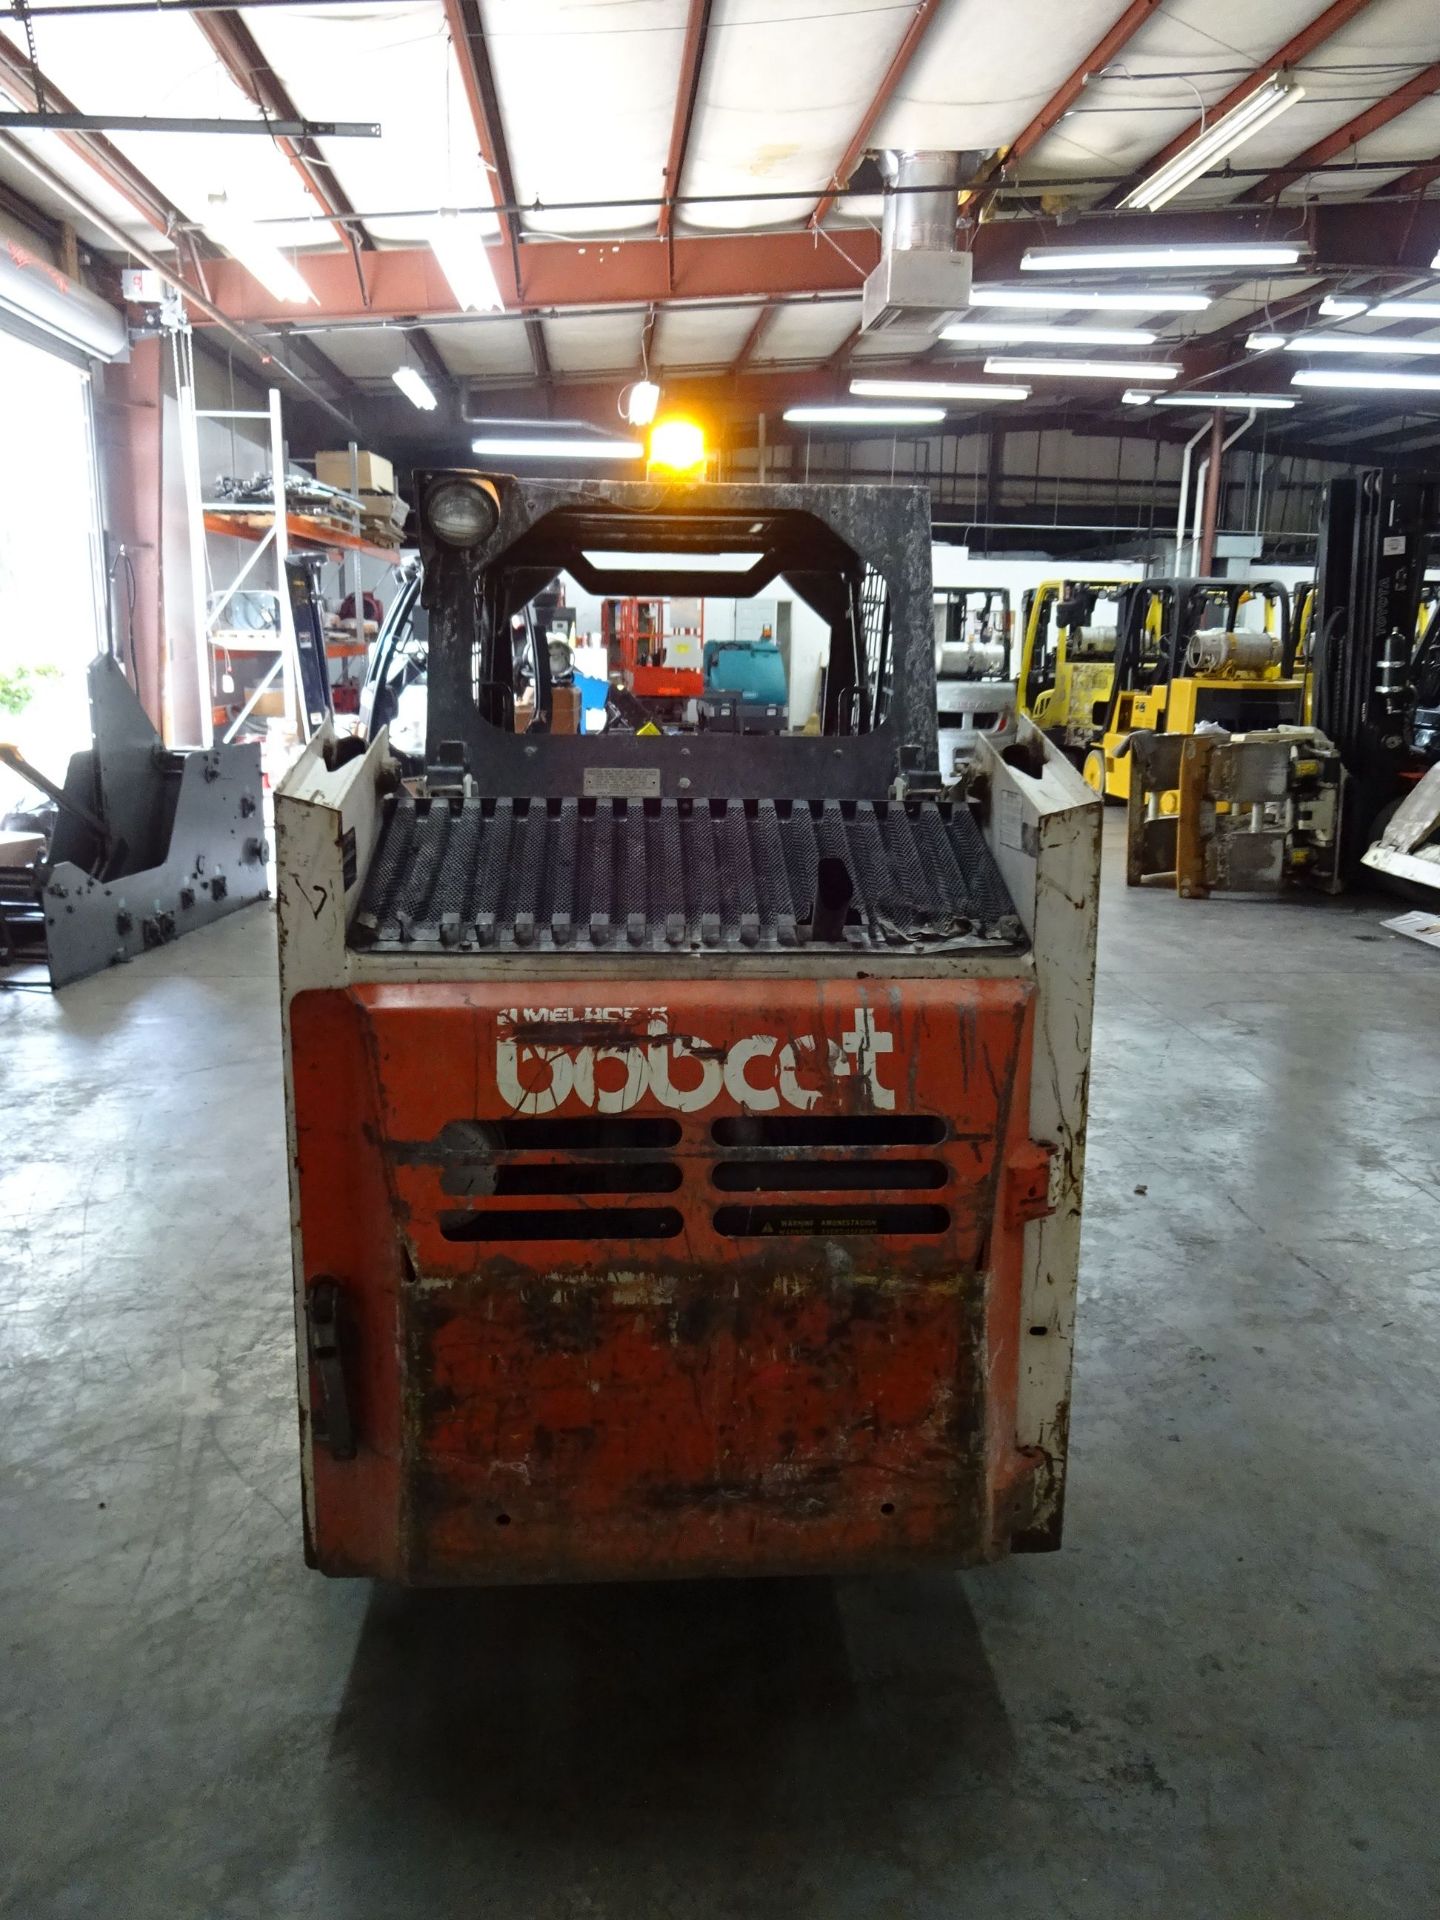 BOBCAT MODEL 743 HARD TIRE DIESEL POWERED SKID STEER; S/N 5019M27017 (4,168 HOURS), FRONT AUXILIARY, - Image 5 of 9